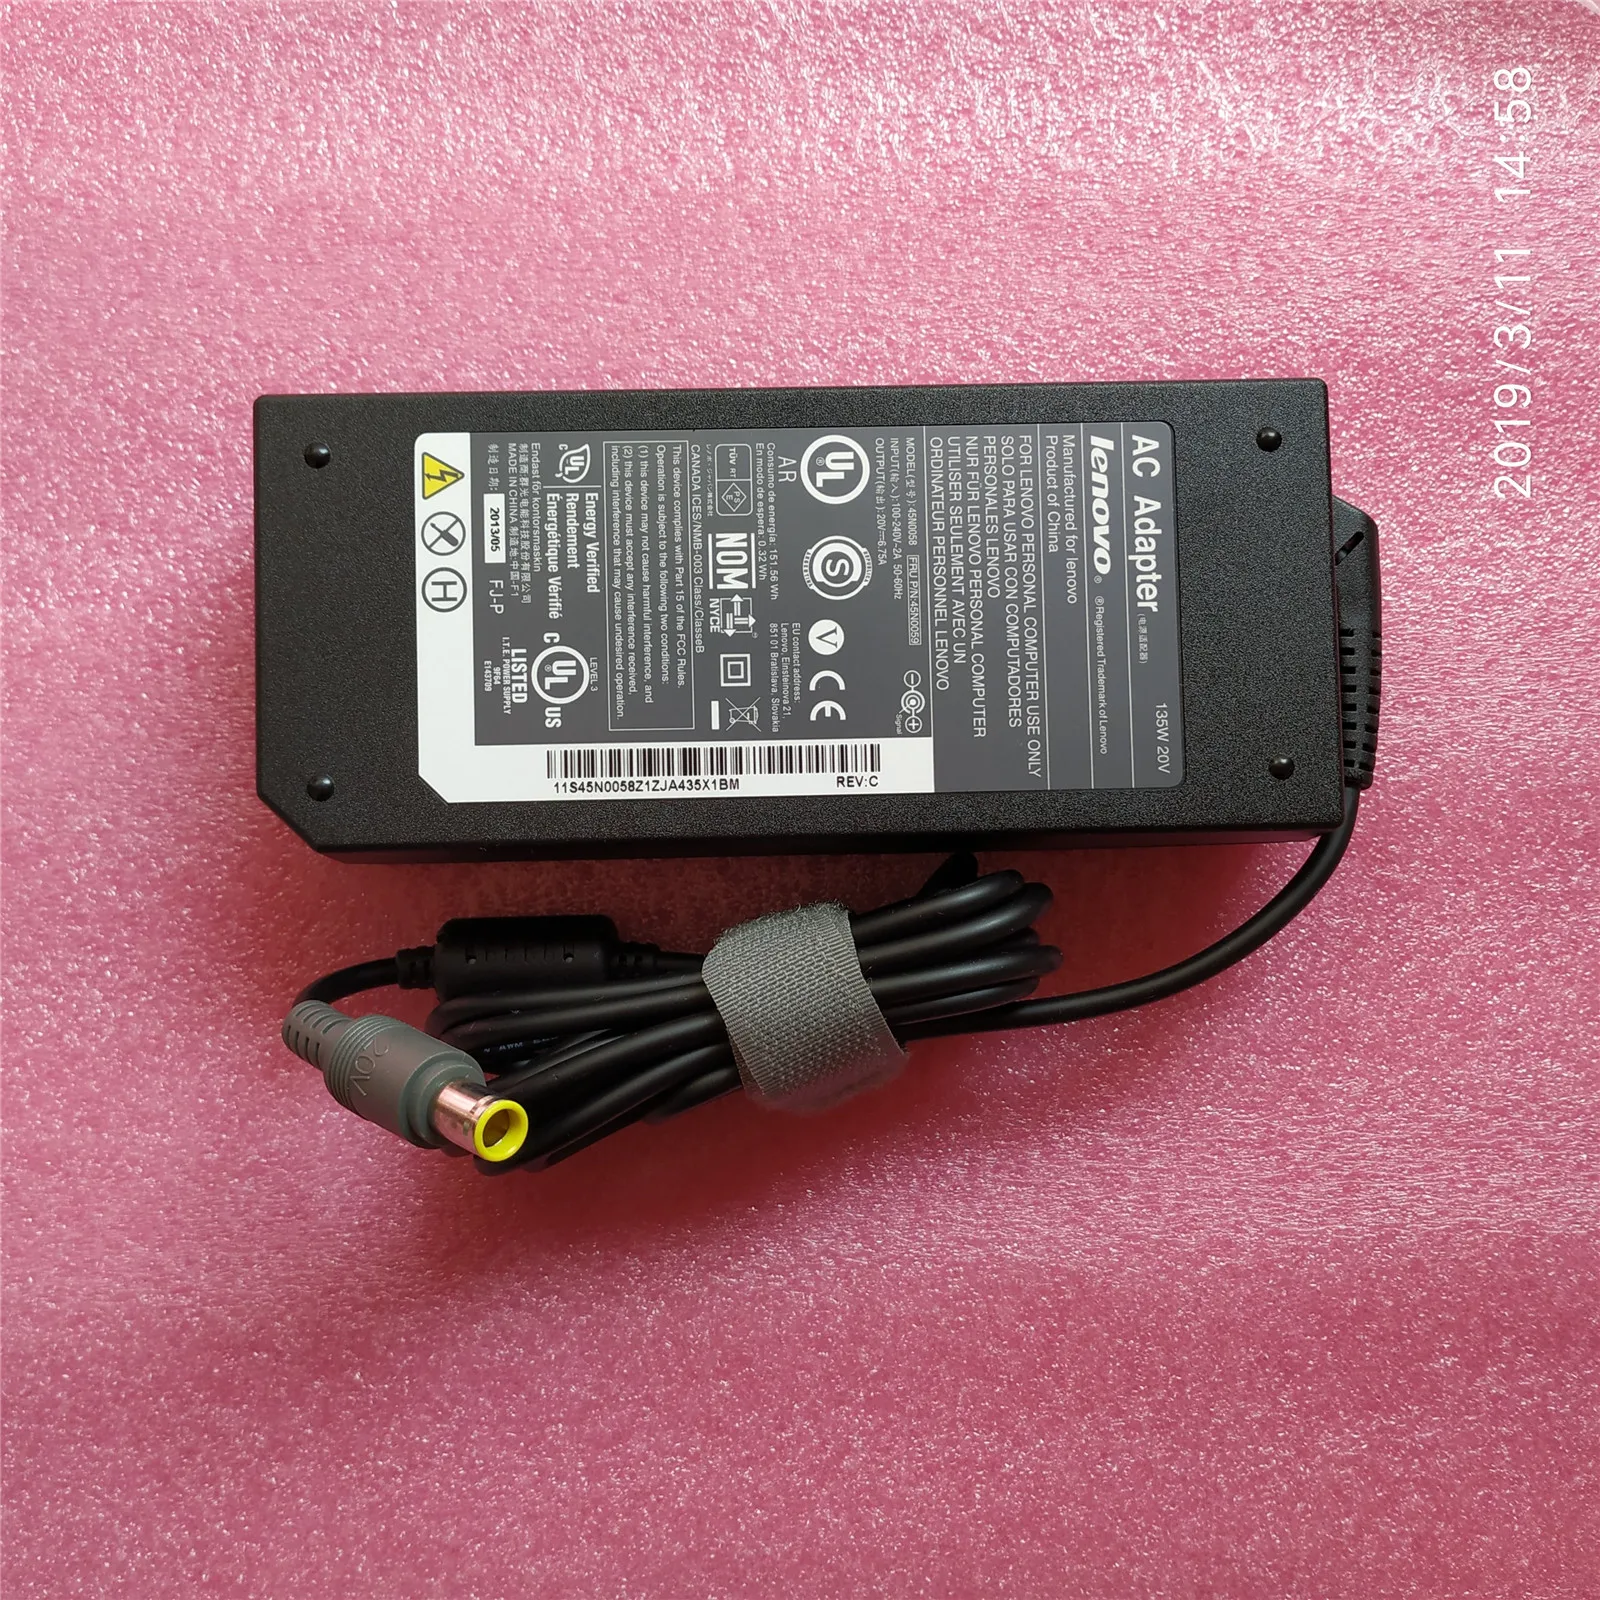 

Original AC Adapter Charger 20V 6.75A 135W Laptop Power Supply For ThinkPad T530 T520 W530 W520 W510 2PIN 45N0055 45N0059